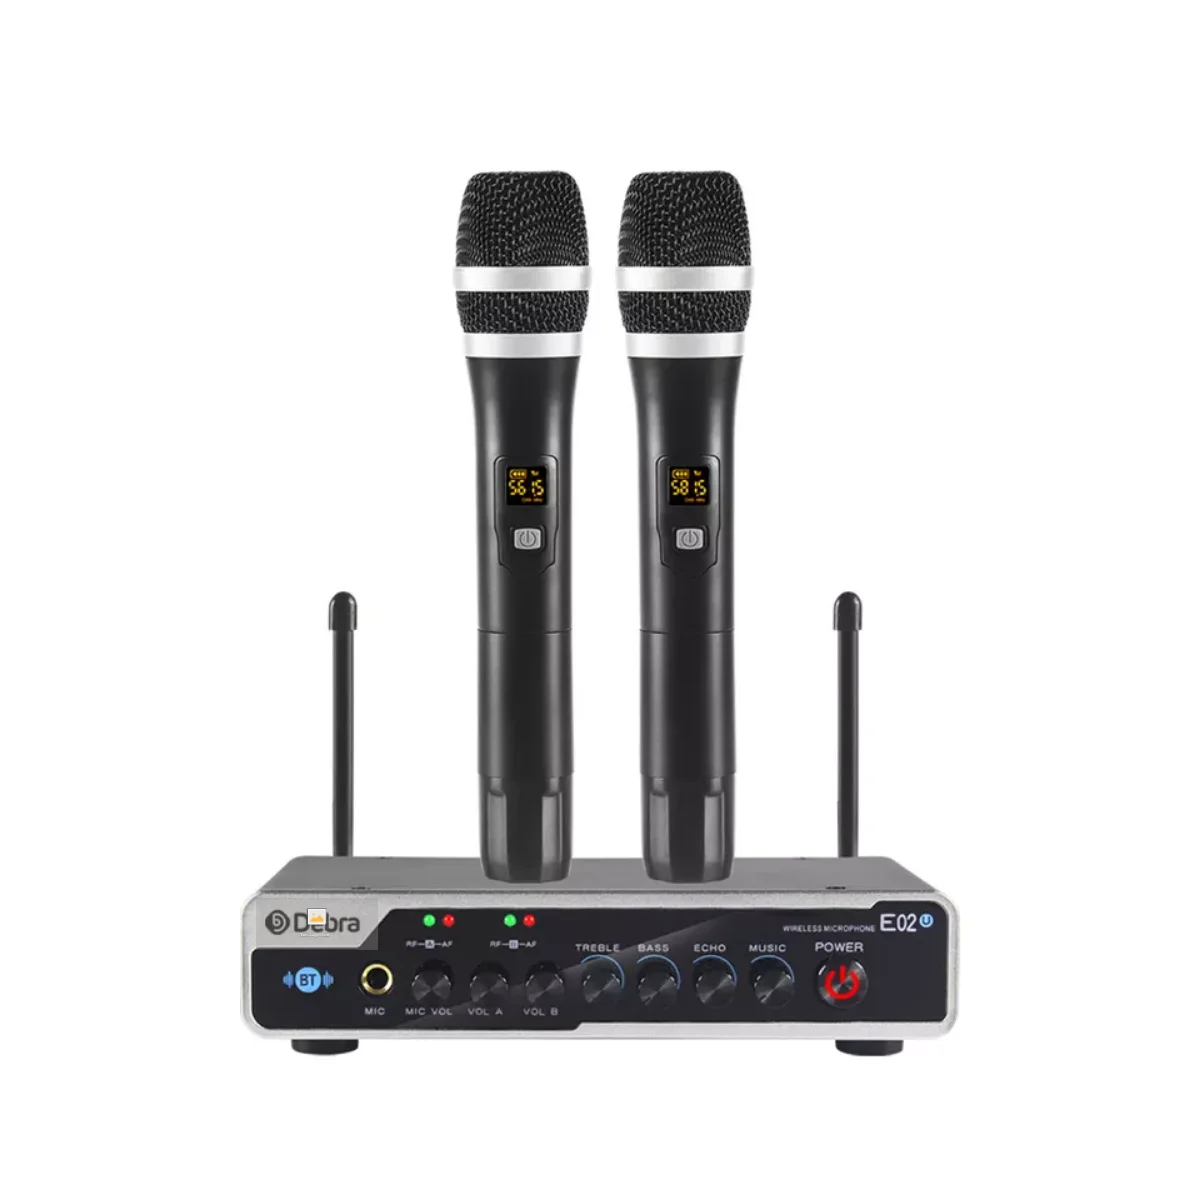 D Debra Audio VM302 VHF Wireless Microphone System with Dual Handheld Mic  Have XLR Interface, 80M Range, for Home Karaoke Wedding Conference S並行輸入  通販